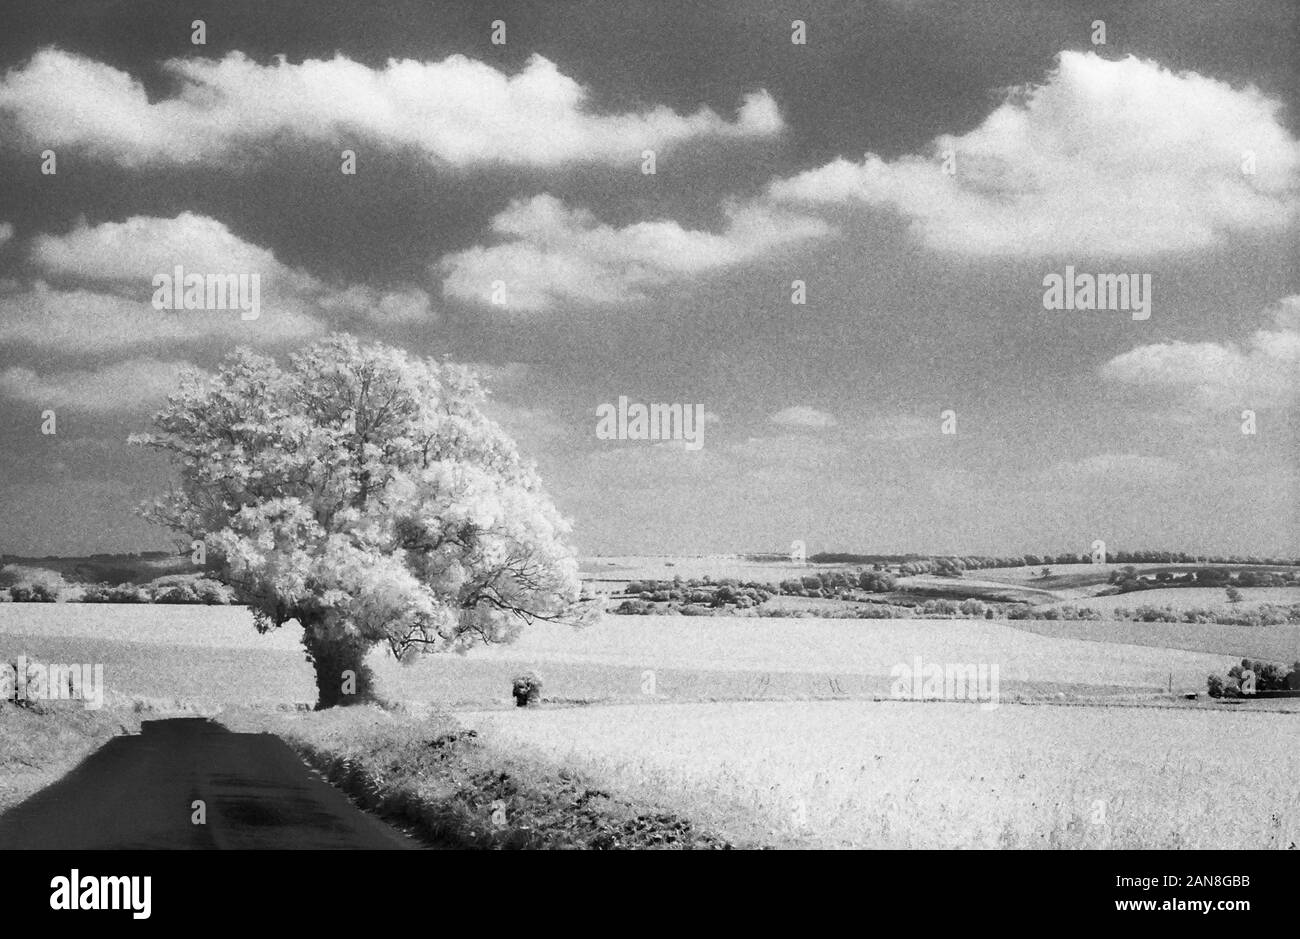 Sheep Pond Lane, near Droxford, Hampshire, England, UK.  Black and white infra-red filmstock, with its characteristic prominent grain structure, high-contrast and glowing bright foliage. Stock Photo